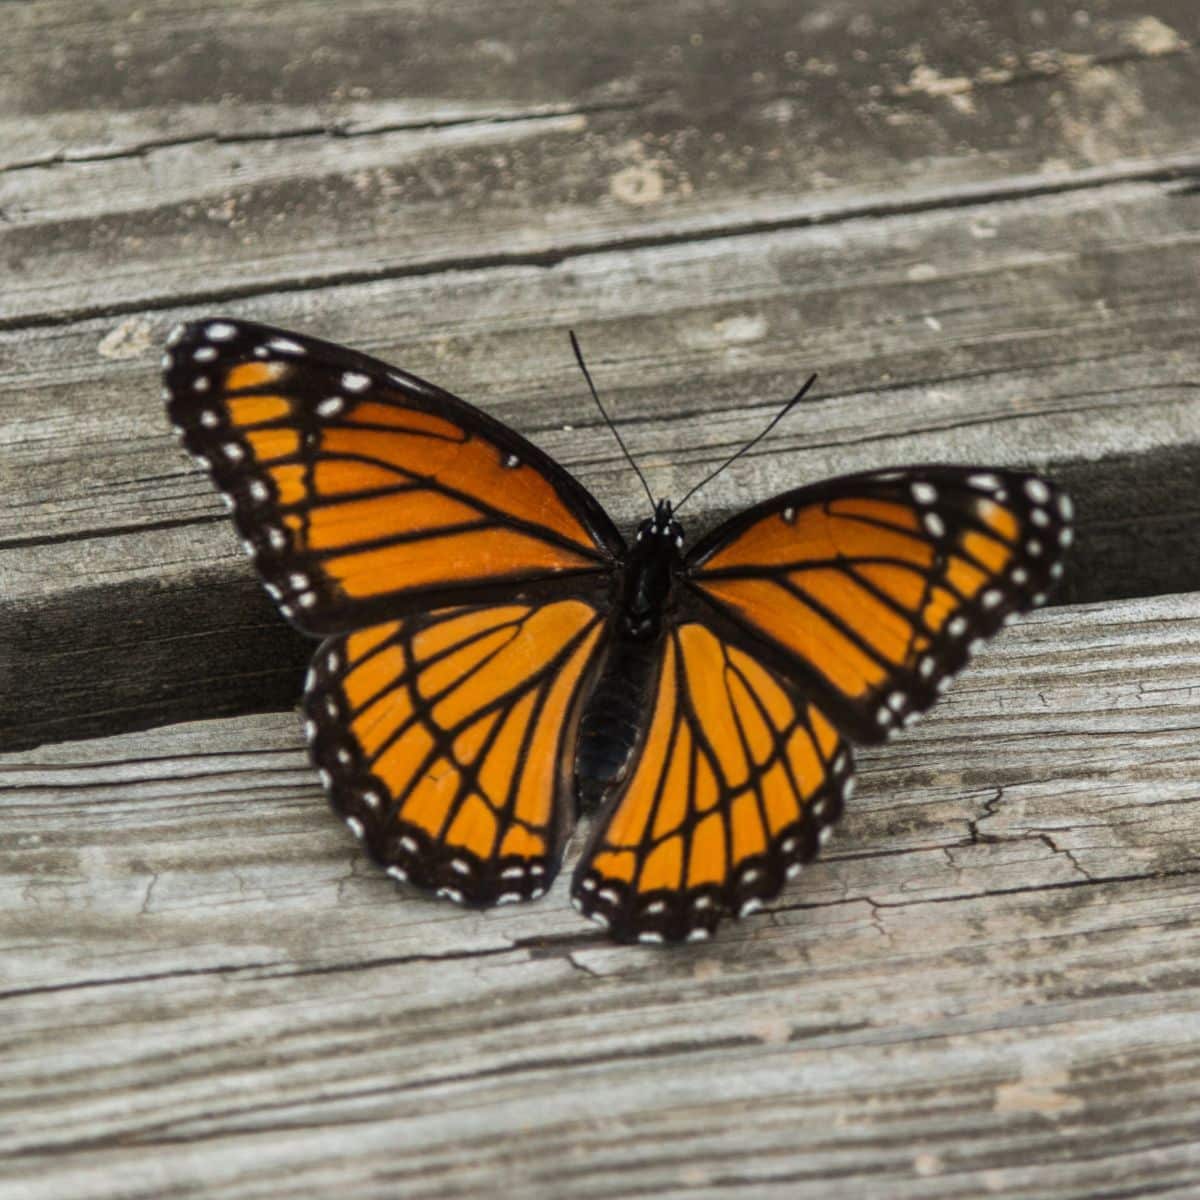 What is the spiritual meaning of the orange and black butterfly